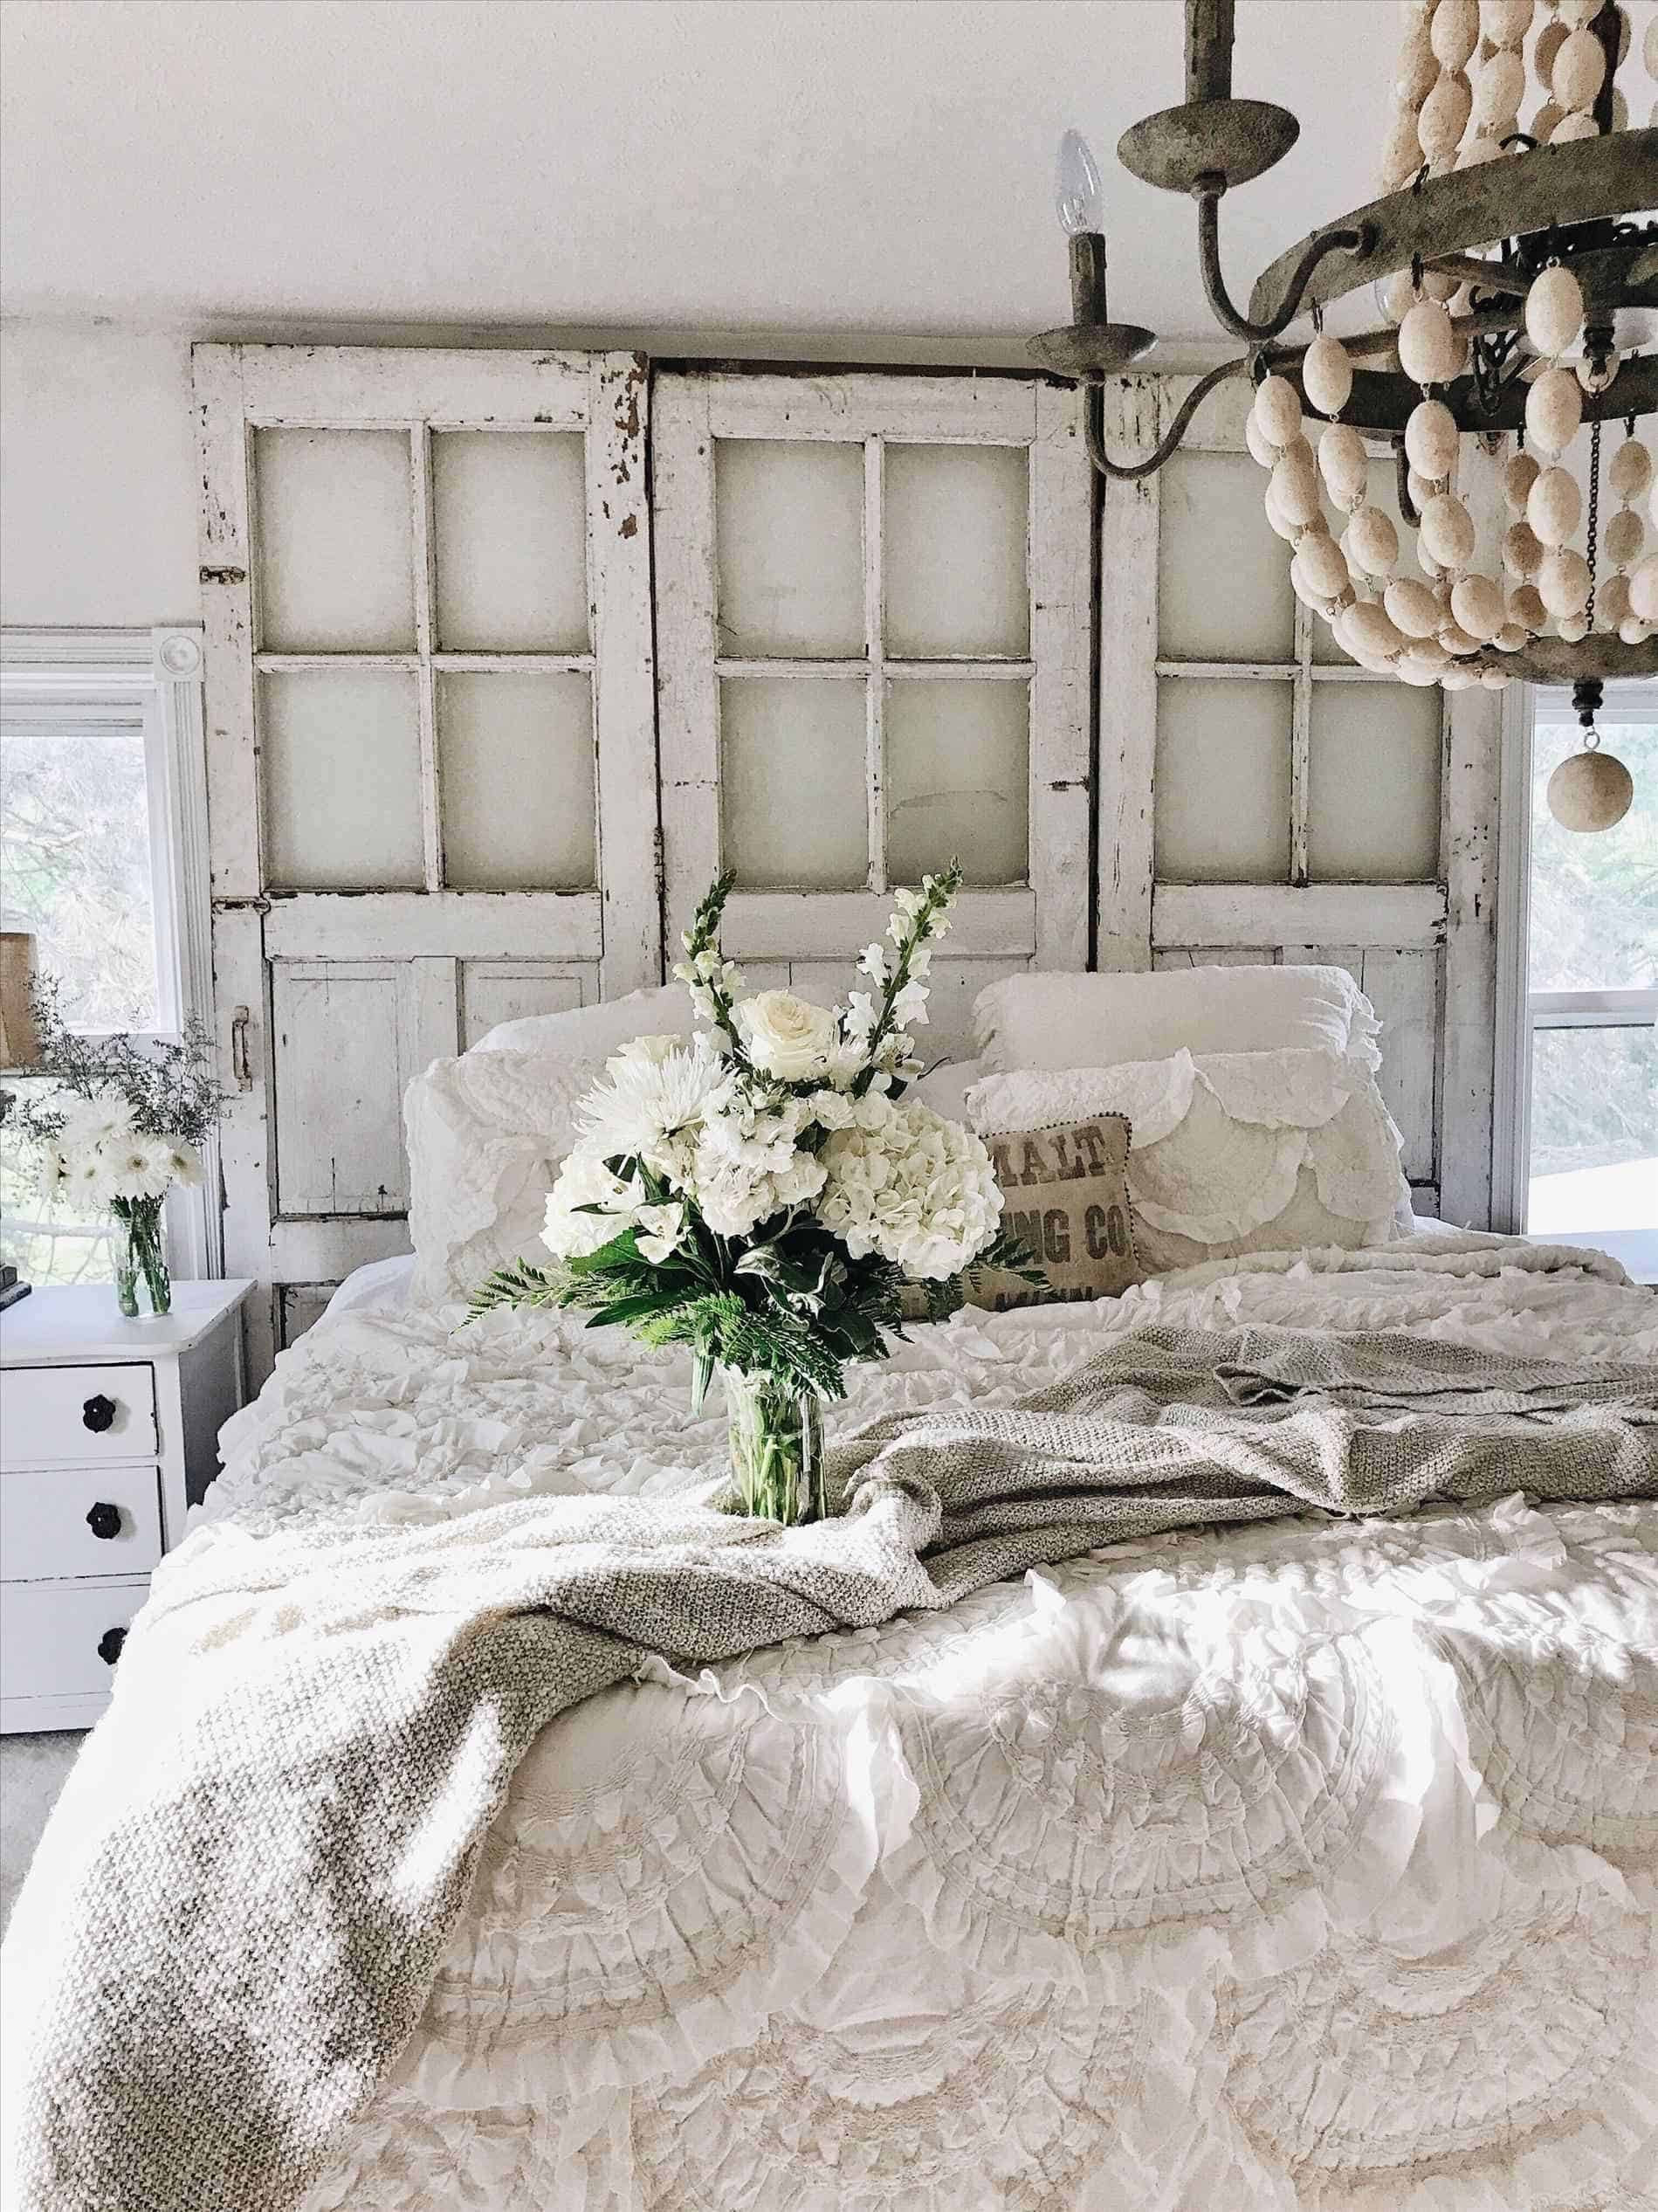 White Shabby Chic Bedroom Unique Beautiful Shabby Chic Bedroom Ideas To Take In Consideration Of White Shabby Chic Bedroom 